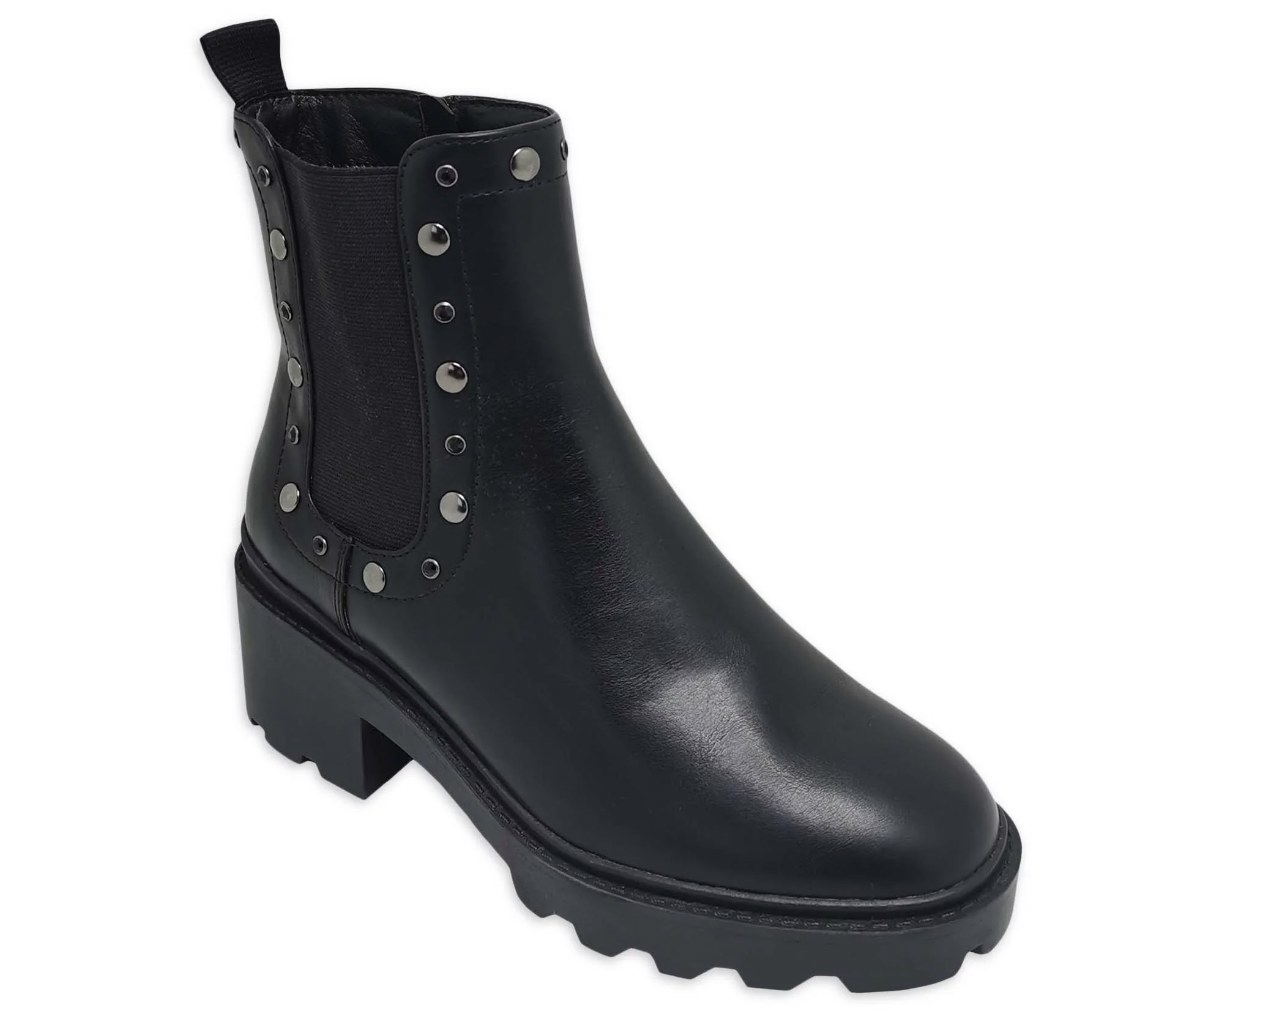 A black Chelsea boot with grommet details